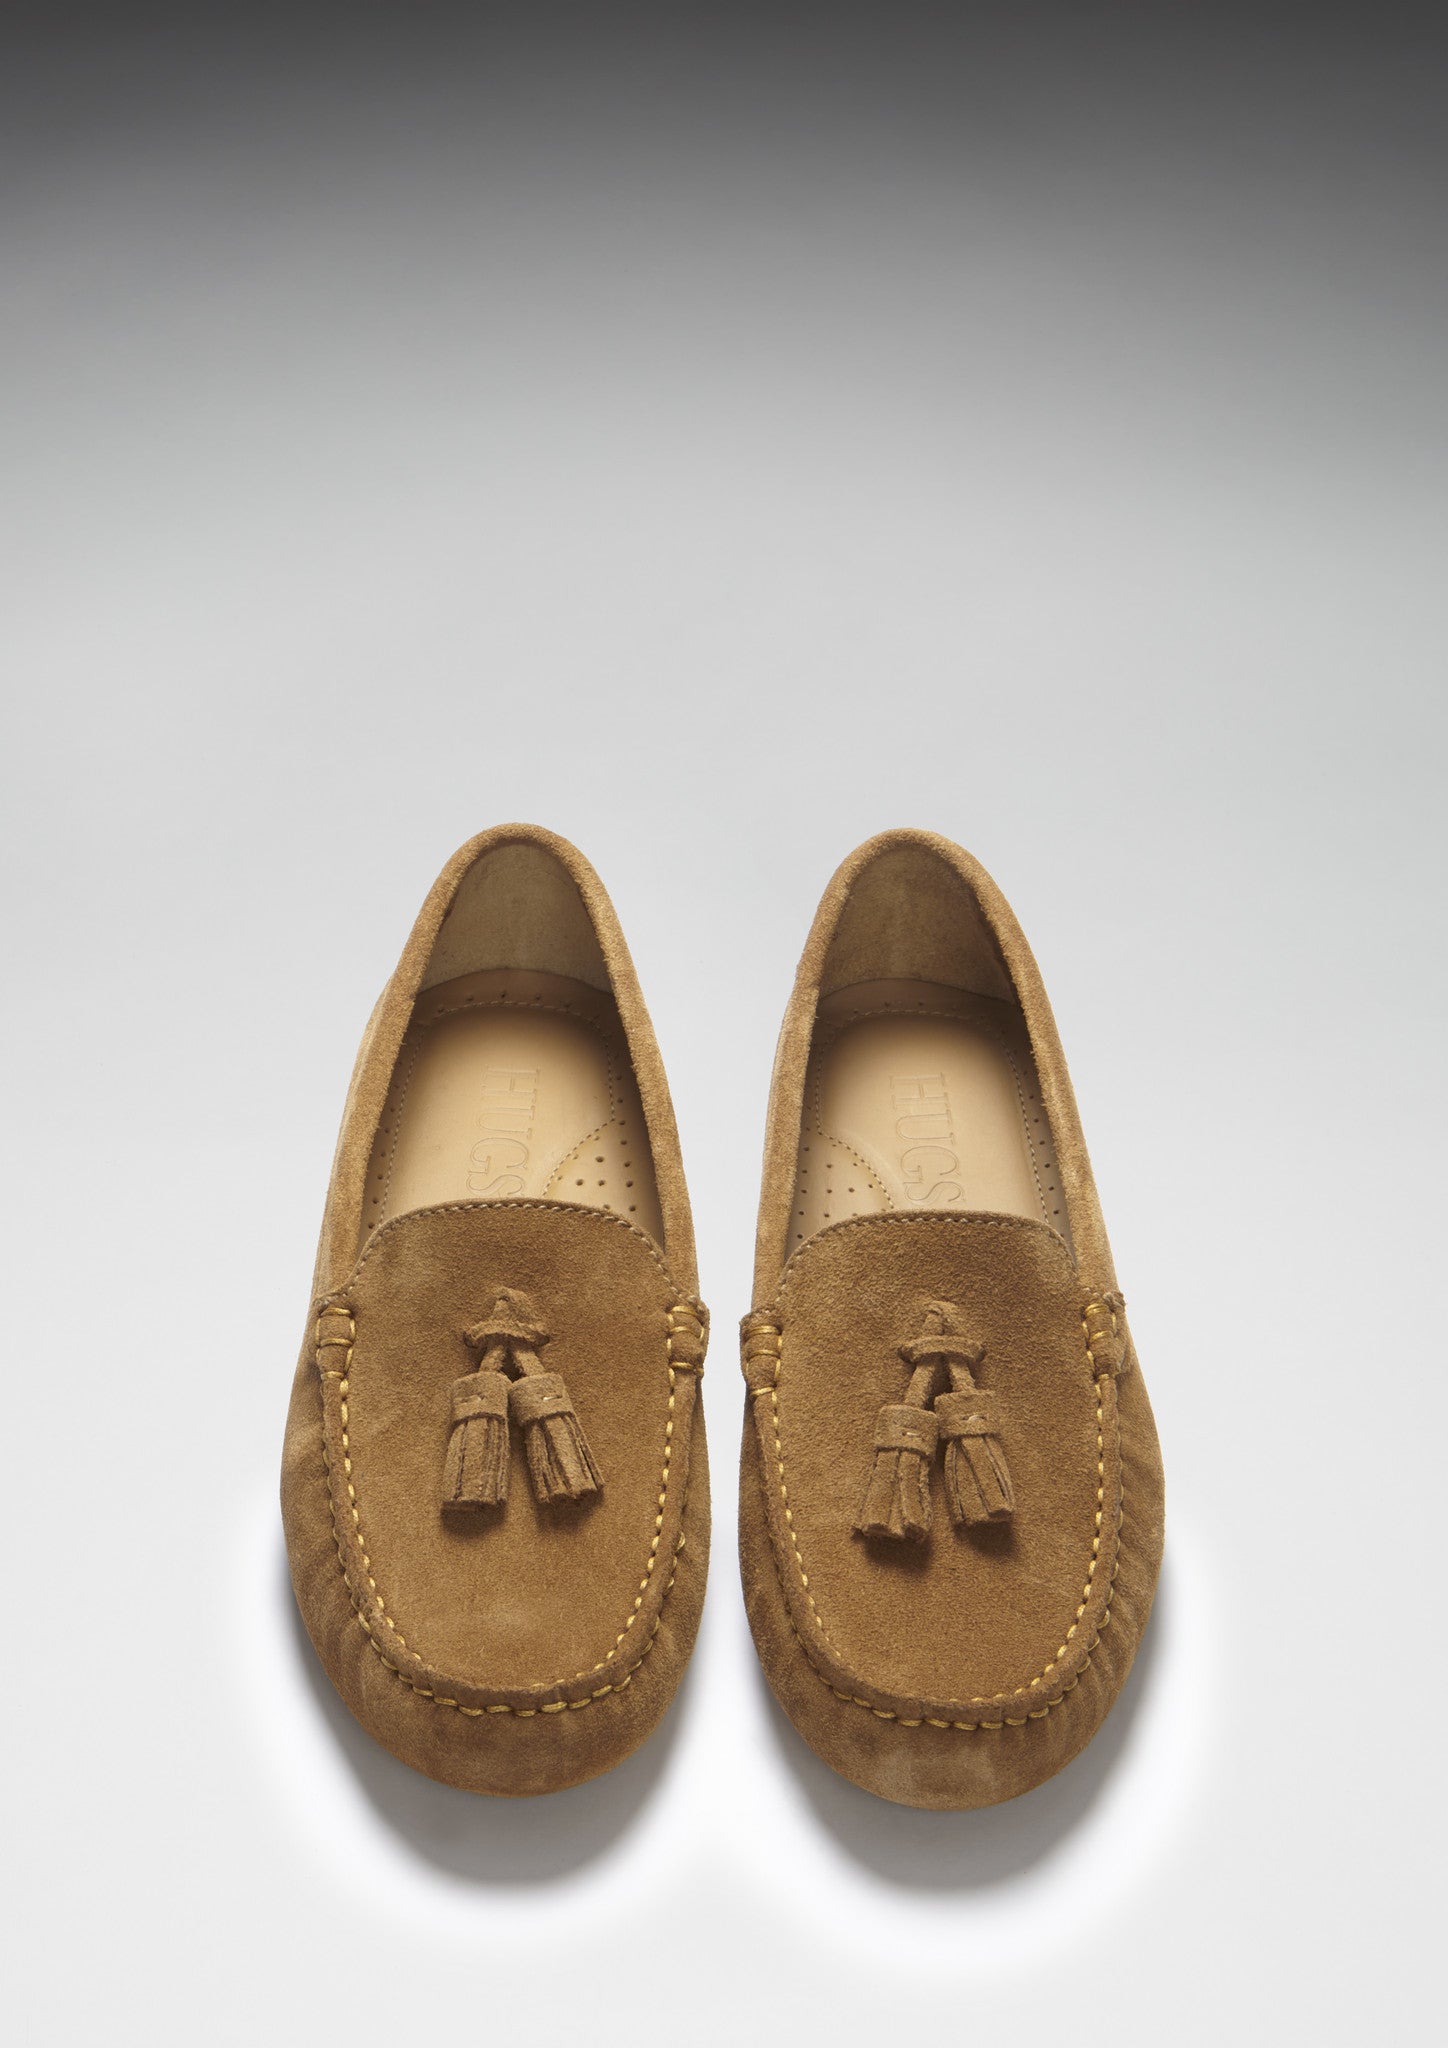 Women's Tasselled Driving Loafers, tobacco suede